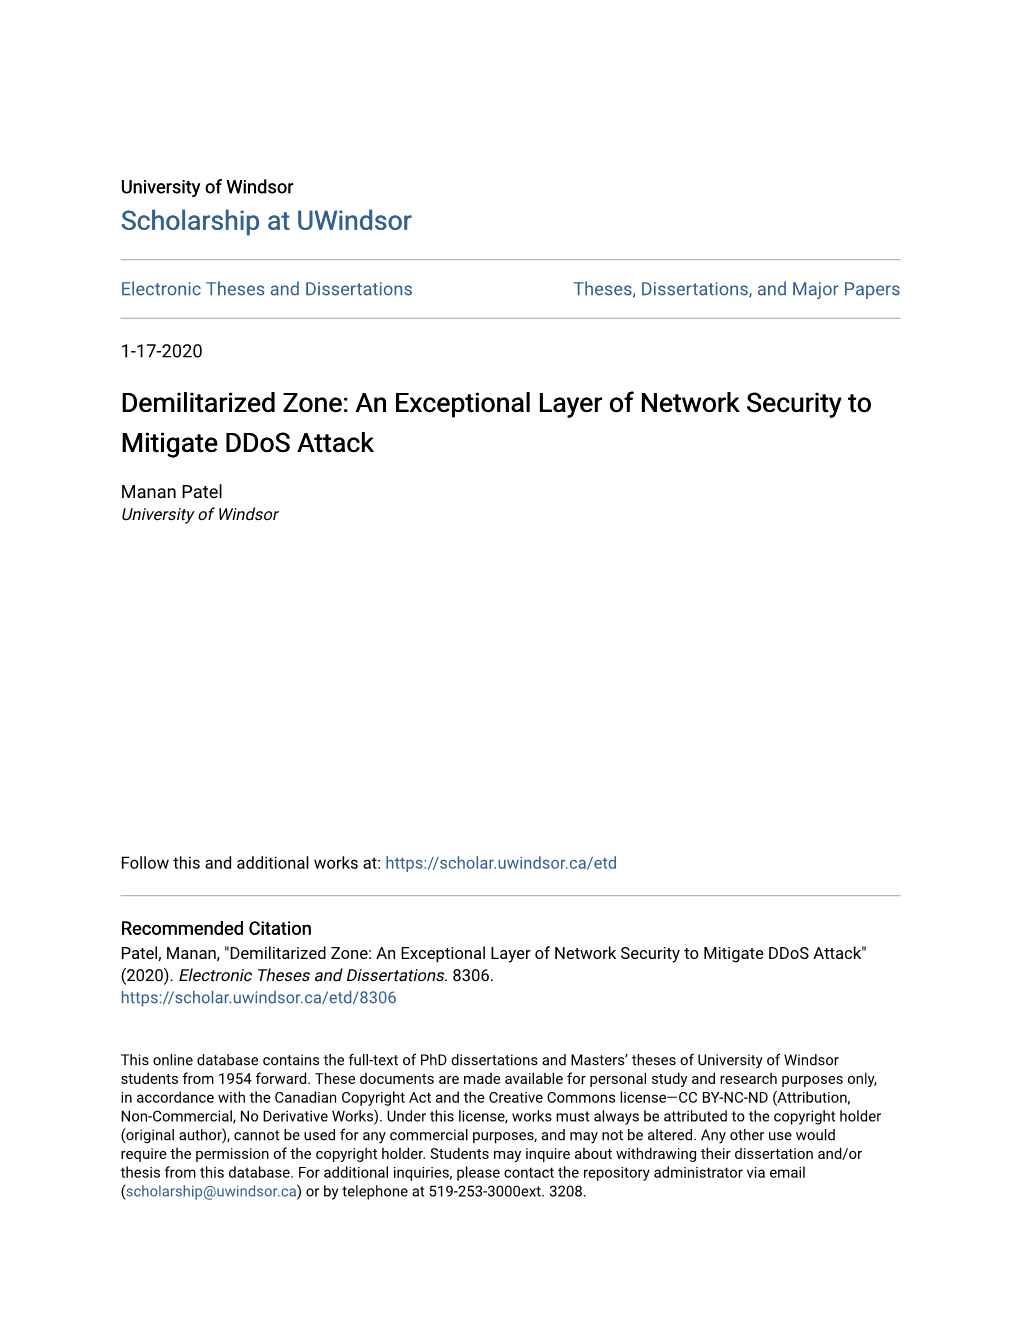 Demilitarized Zone: an Exceptional Layer of Network Security to Mitigate Ddos Attack